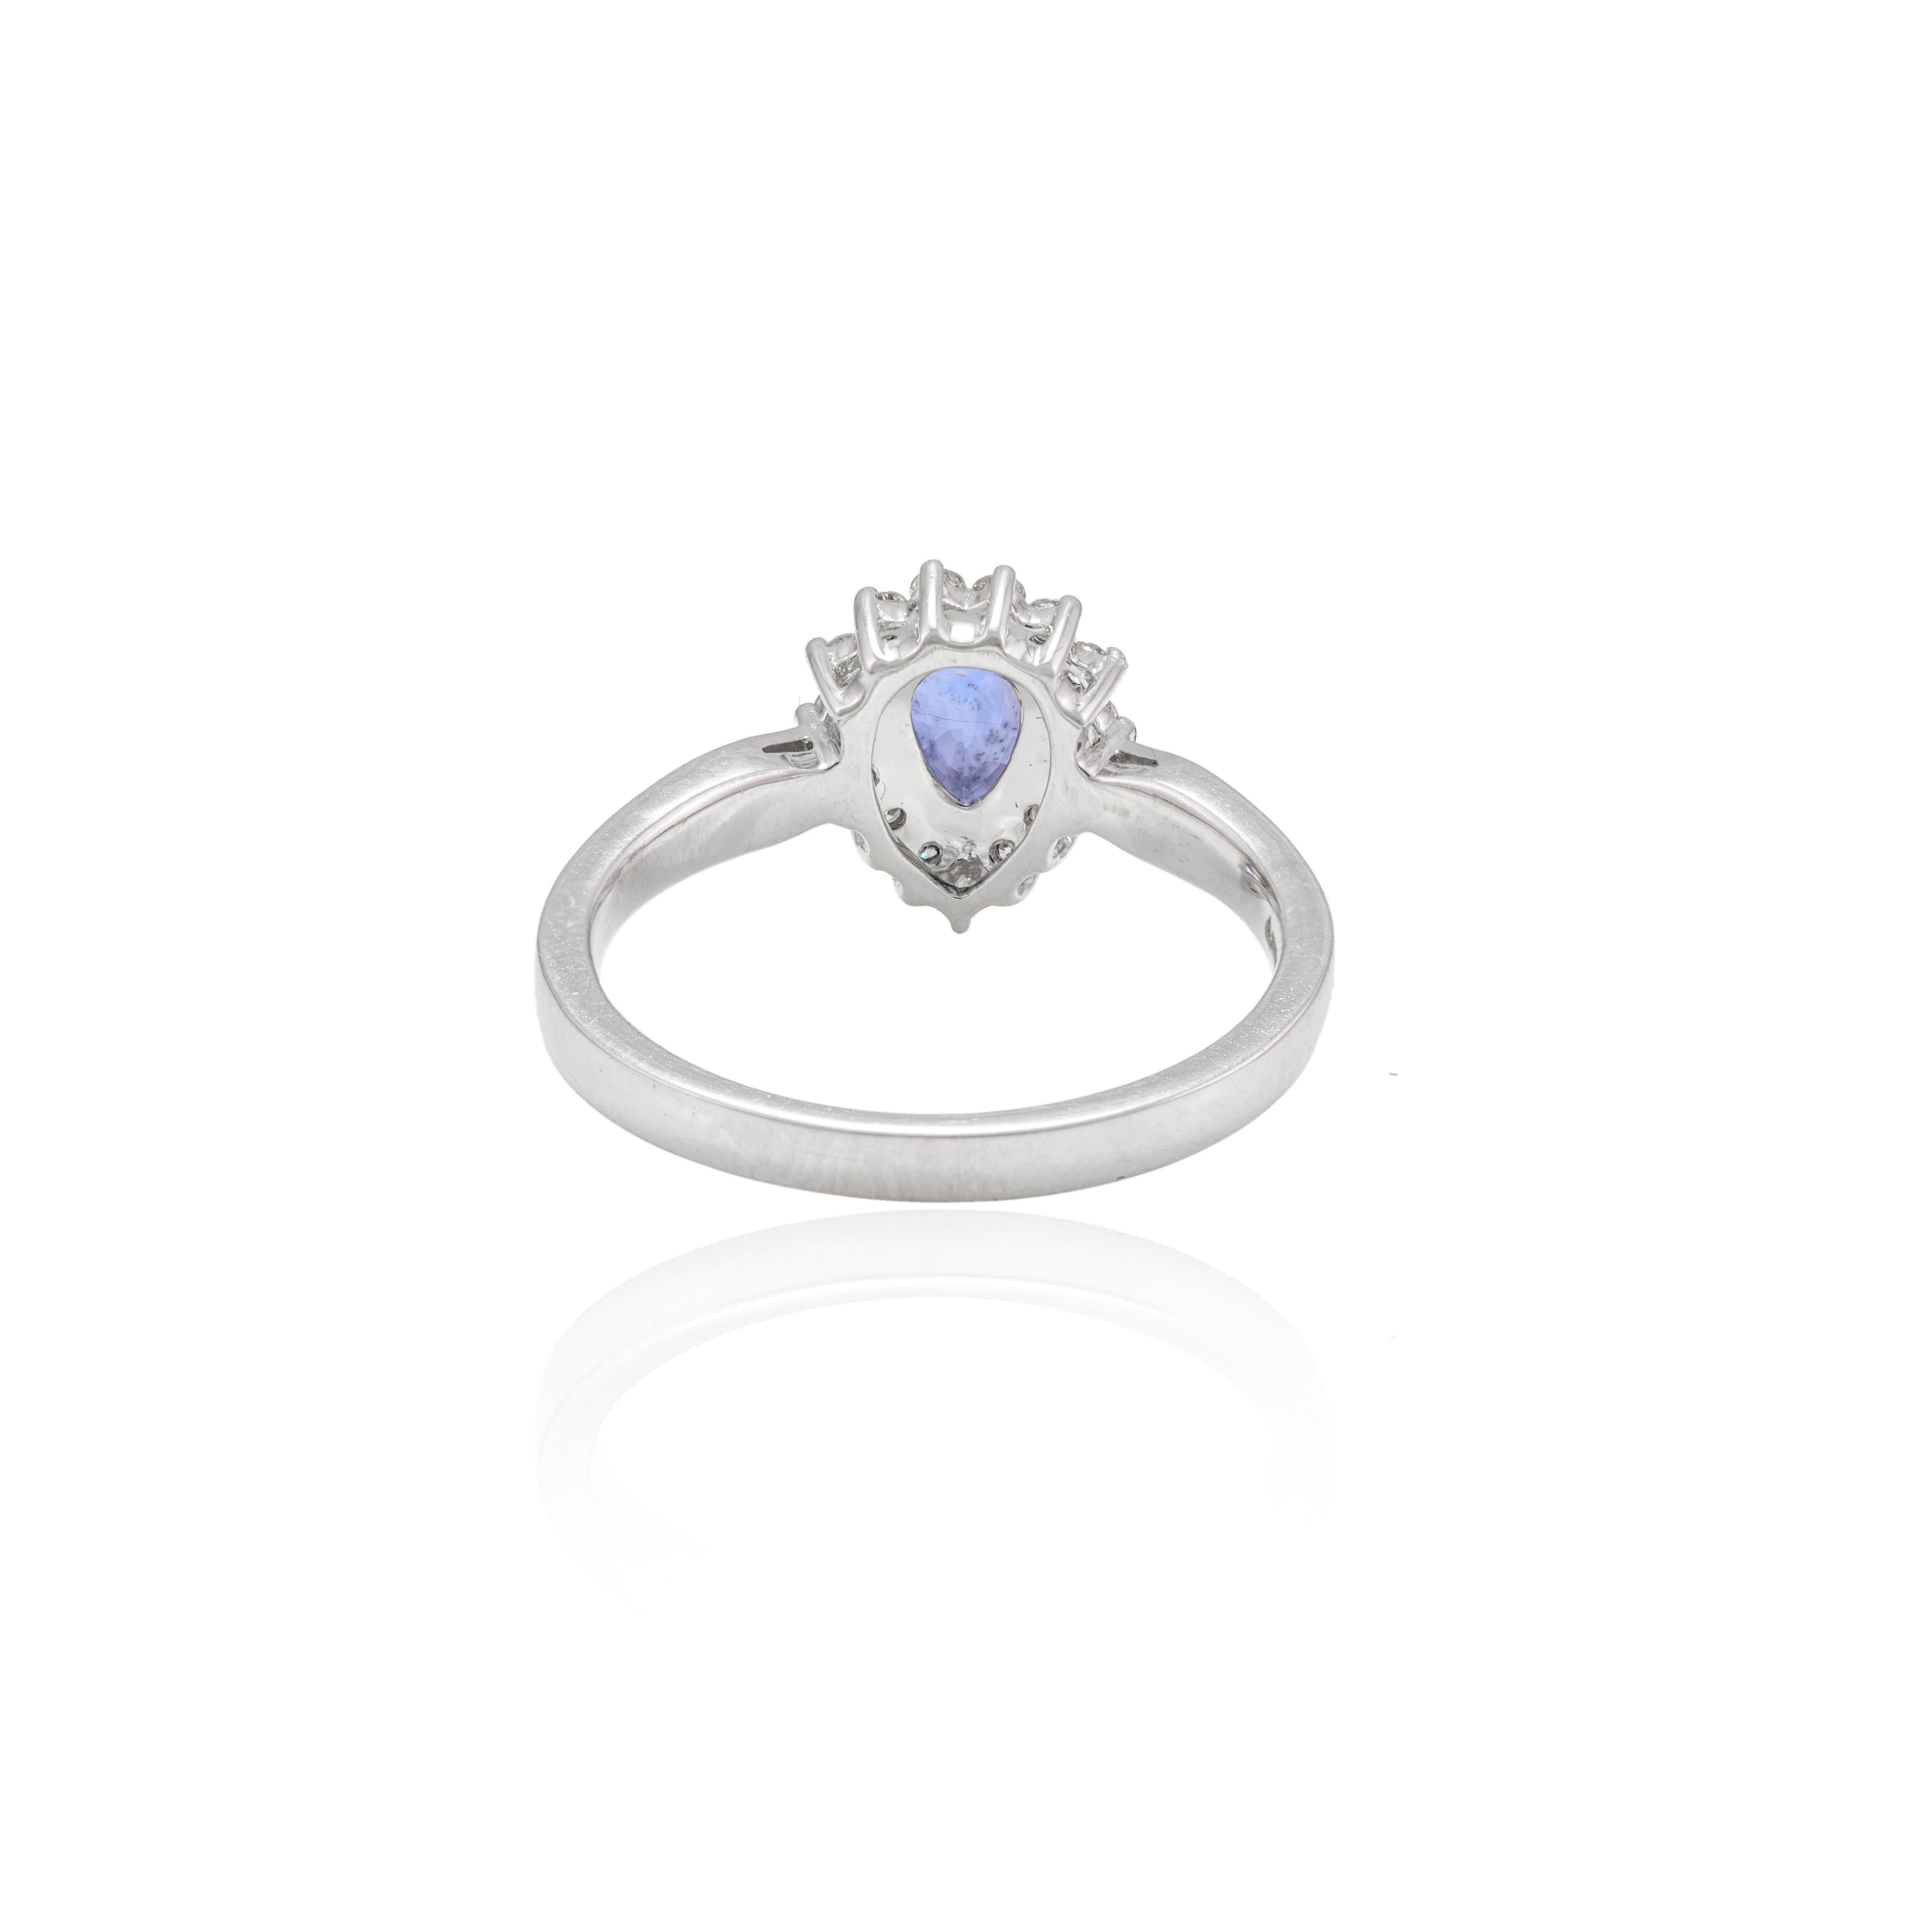 For Sale:  0.77 Carat Pear Cut Blue Sapphire and Diamond Halo Ring 14k Solid White Gold 5